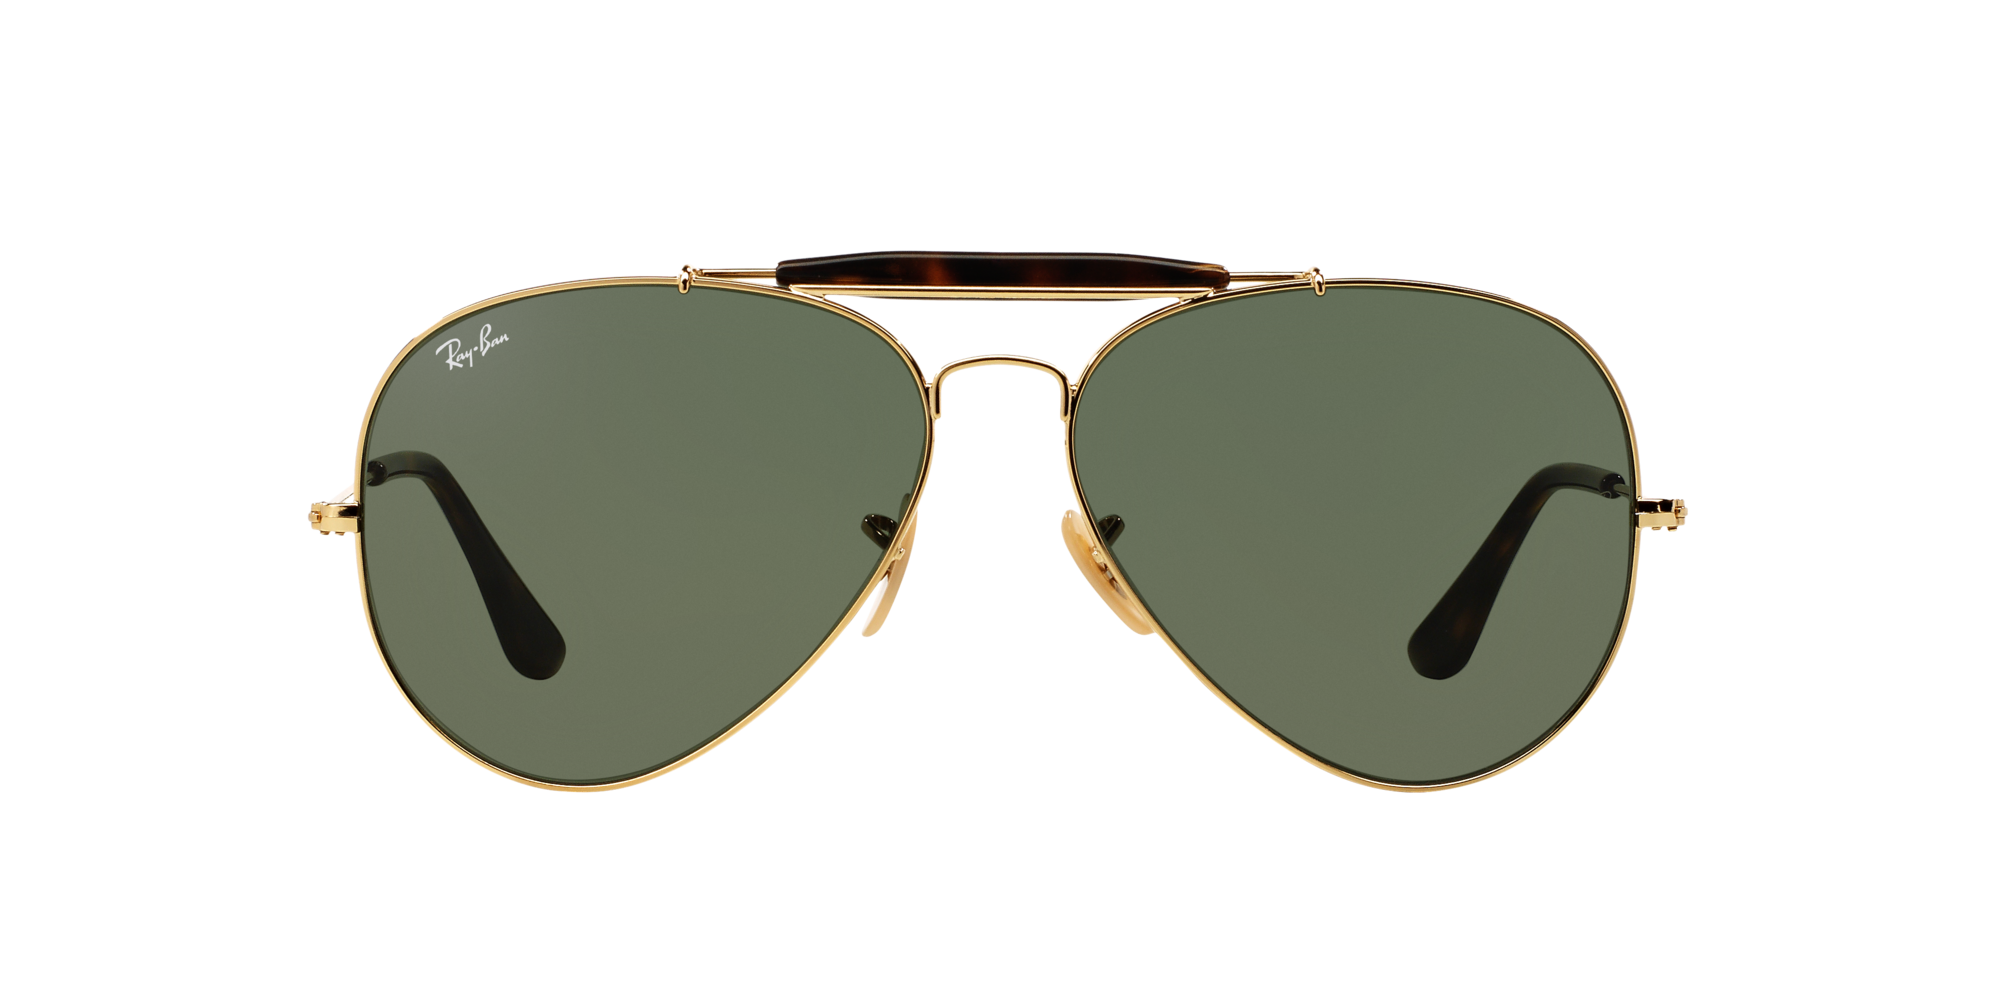 RAY-BAN OUTDOORSMAN II RB 3029 181, , hi-res image number 2